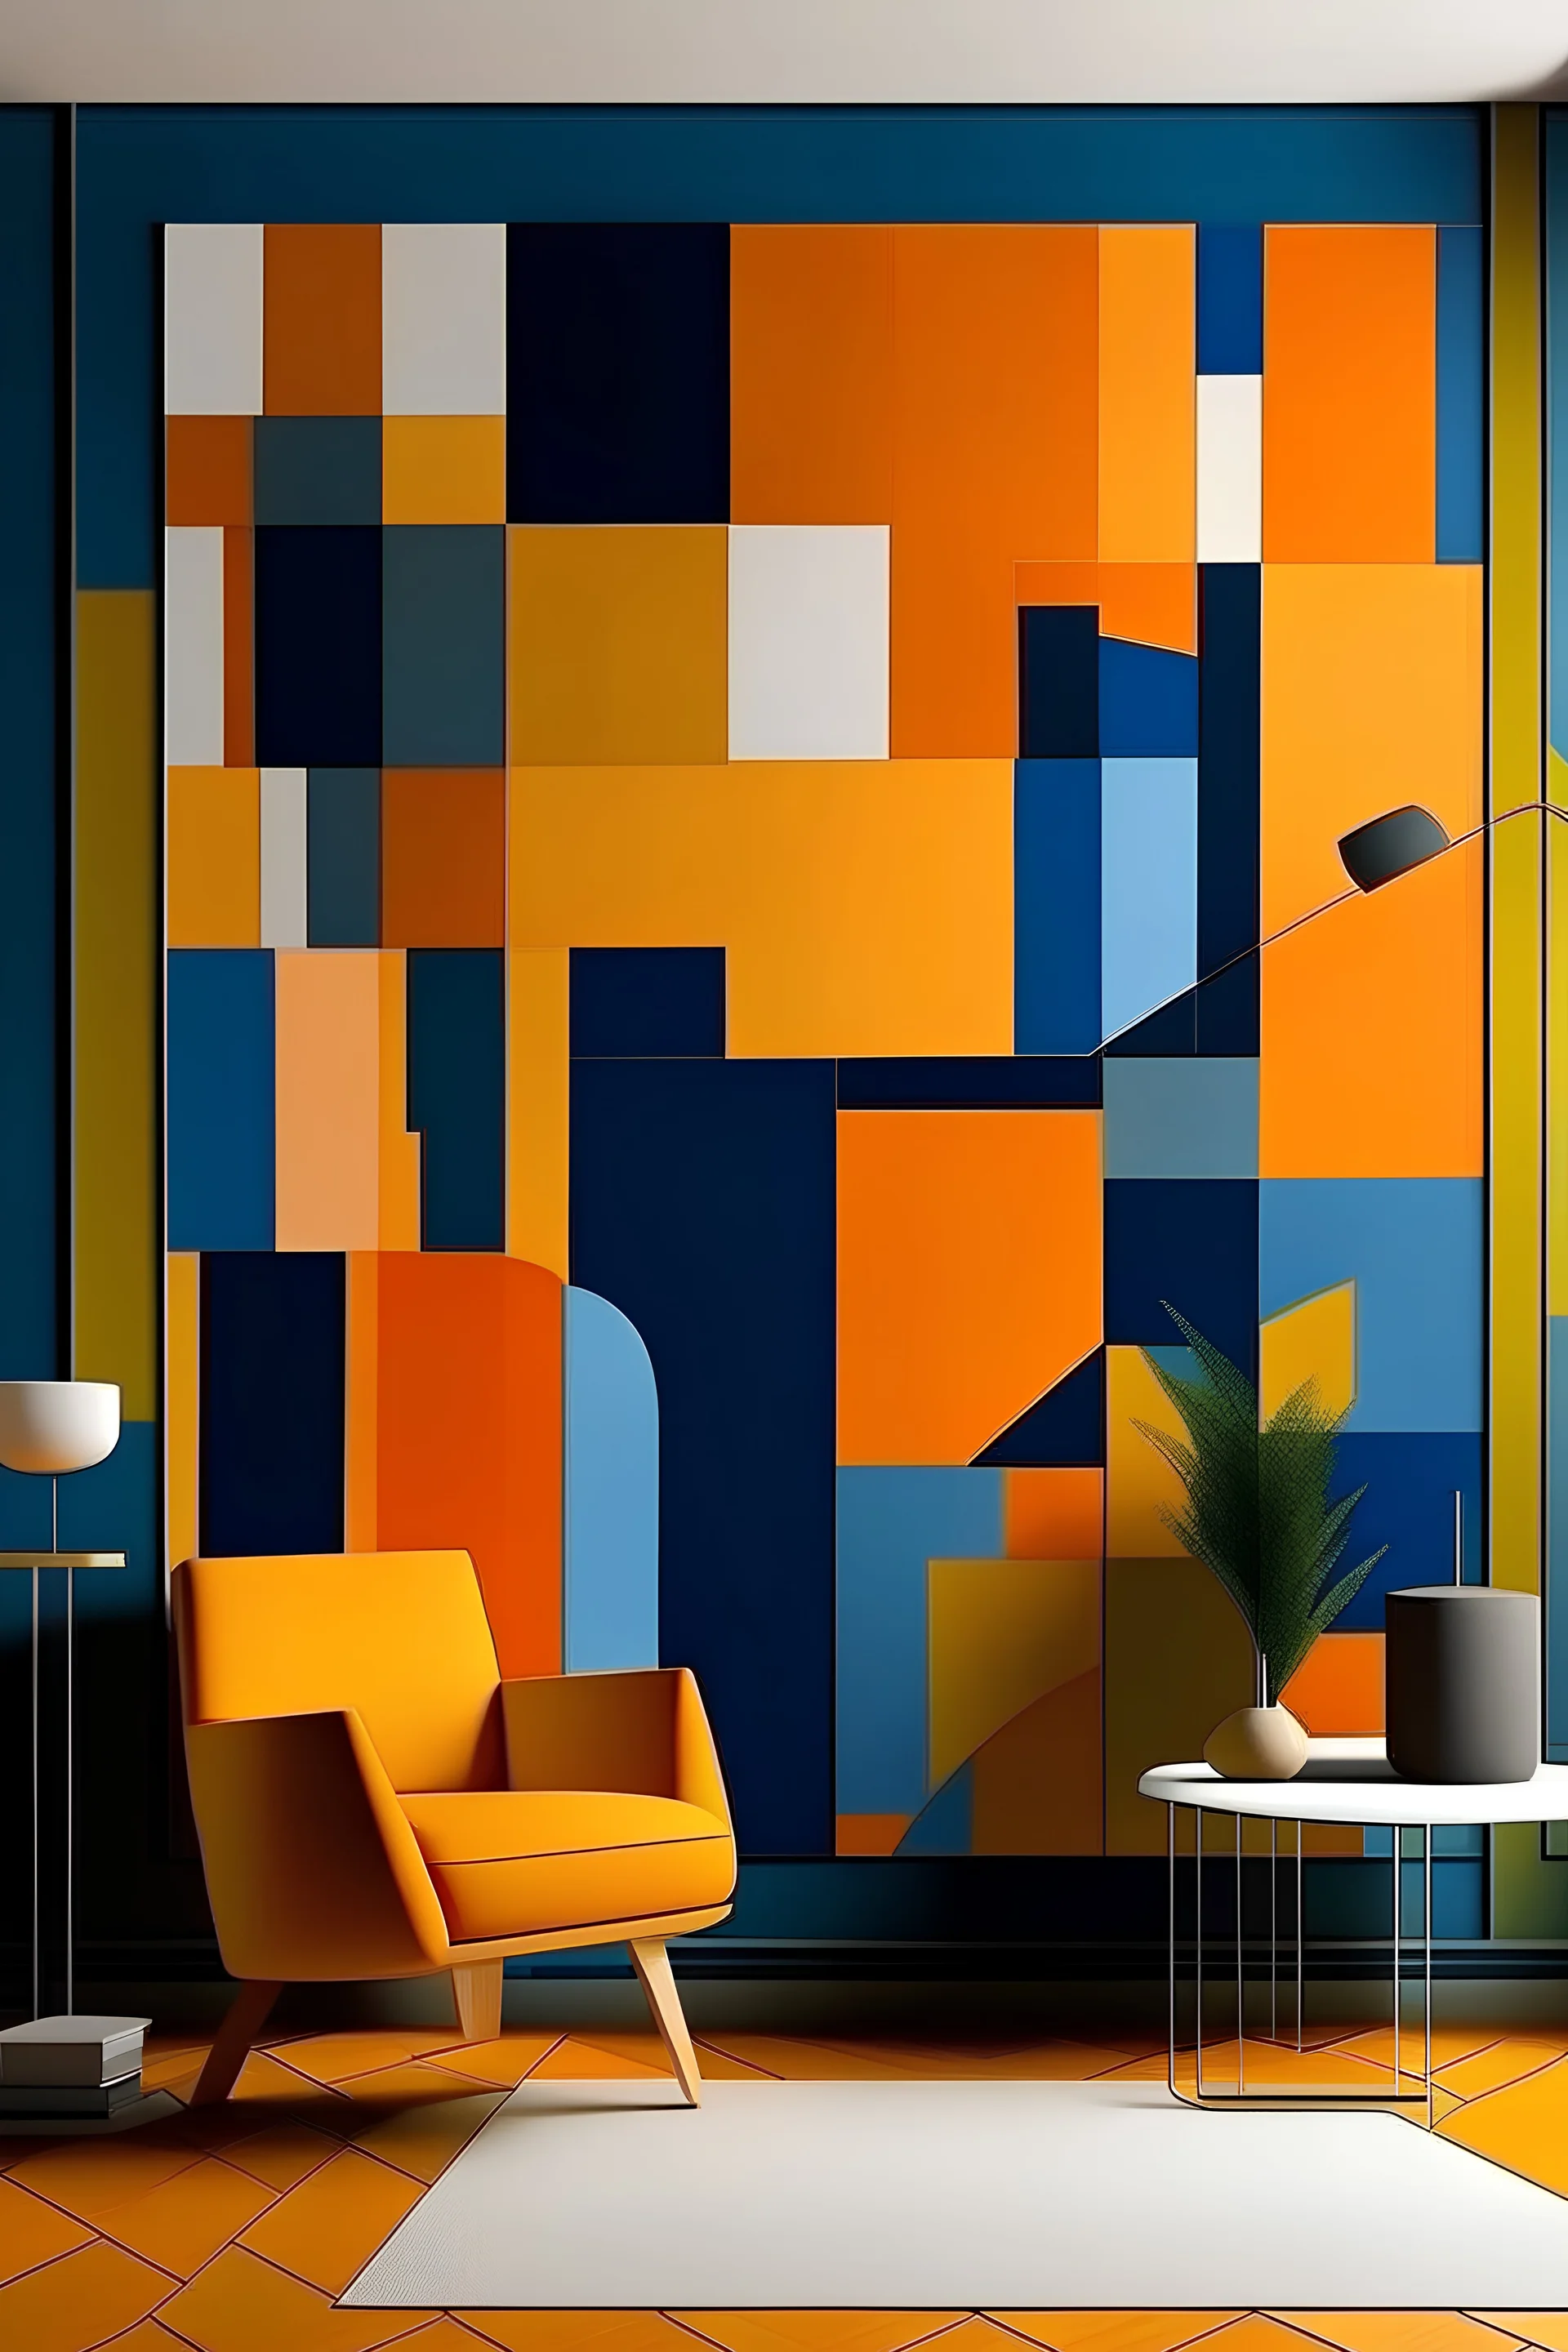 Create a handpainted WALL mural Embrace the cubist art movement by arranging squares in a fragmented and abstract manner. Use a diverse palette to evoke a sense of creativity and energy. Color Palette: Sunset orange, cobalt blue, forest green, mustard yellow.